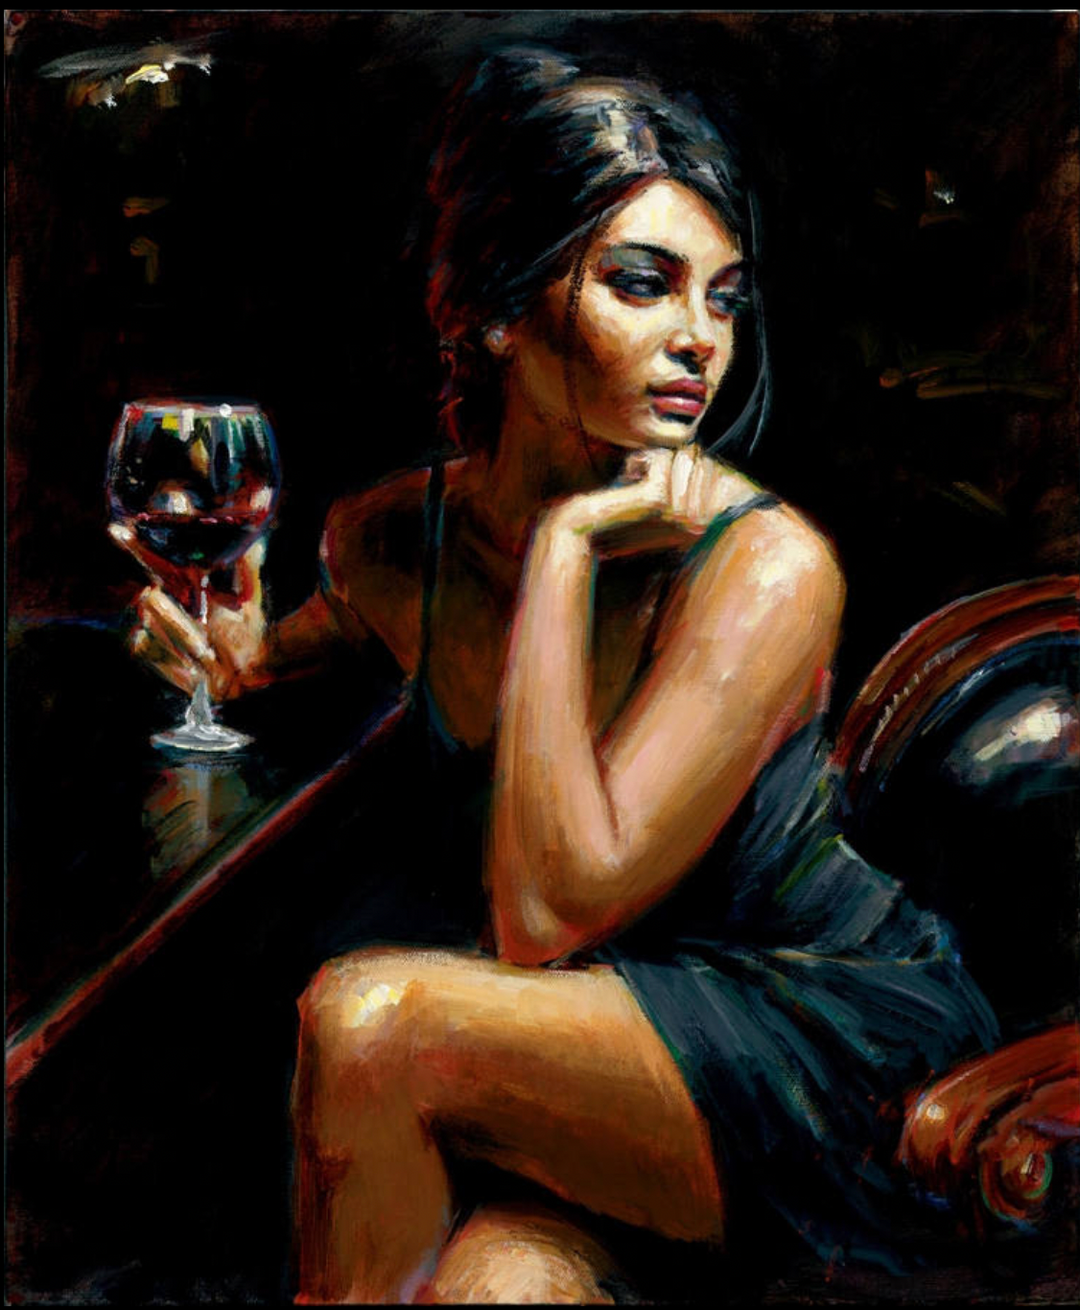 Fabian Perez Art Available from Startle